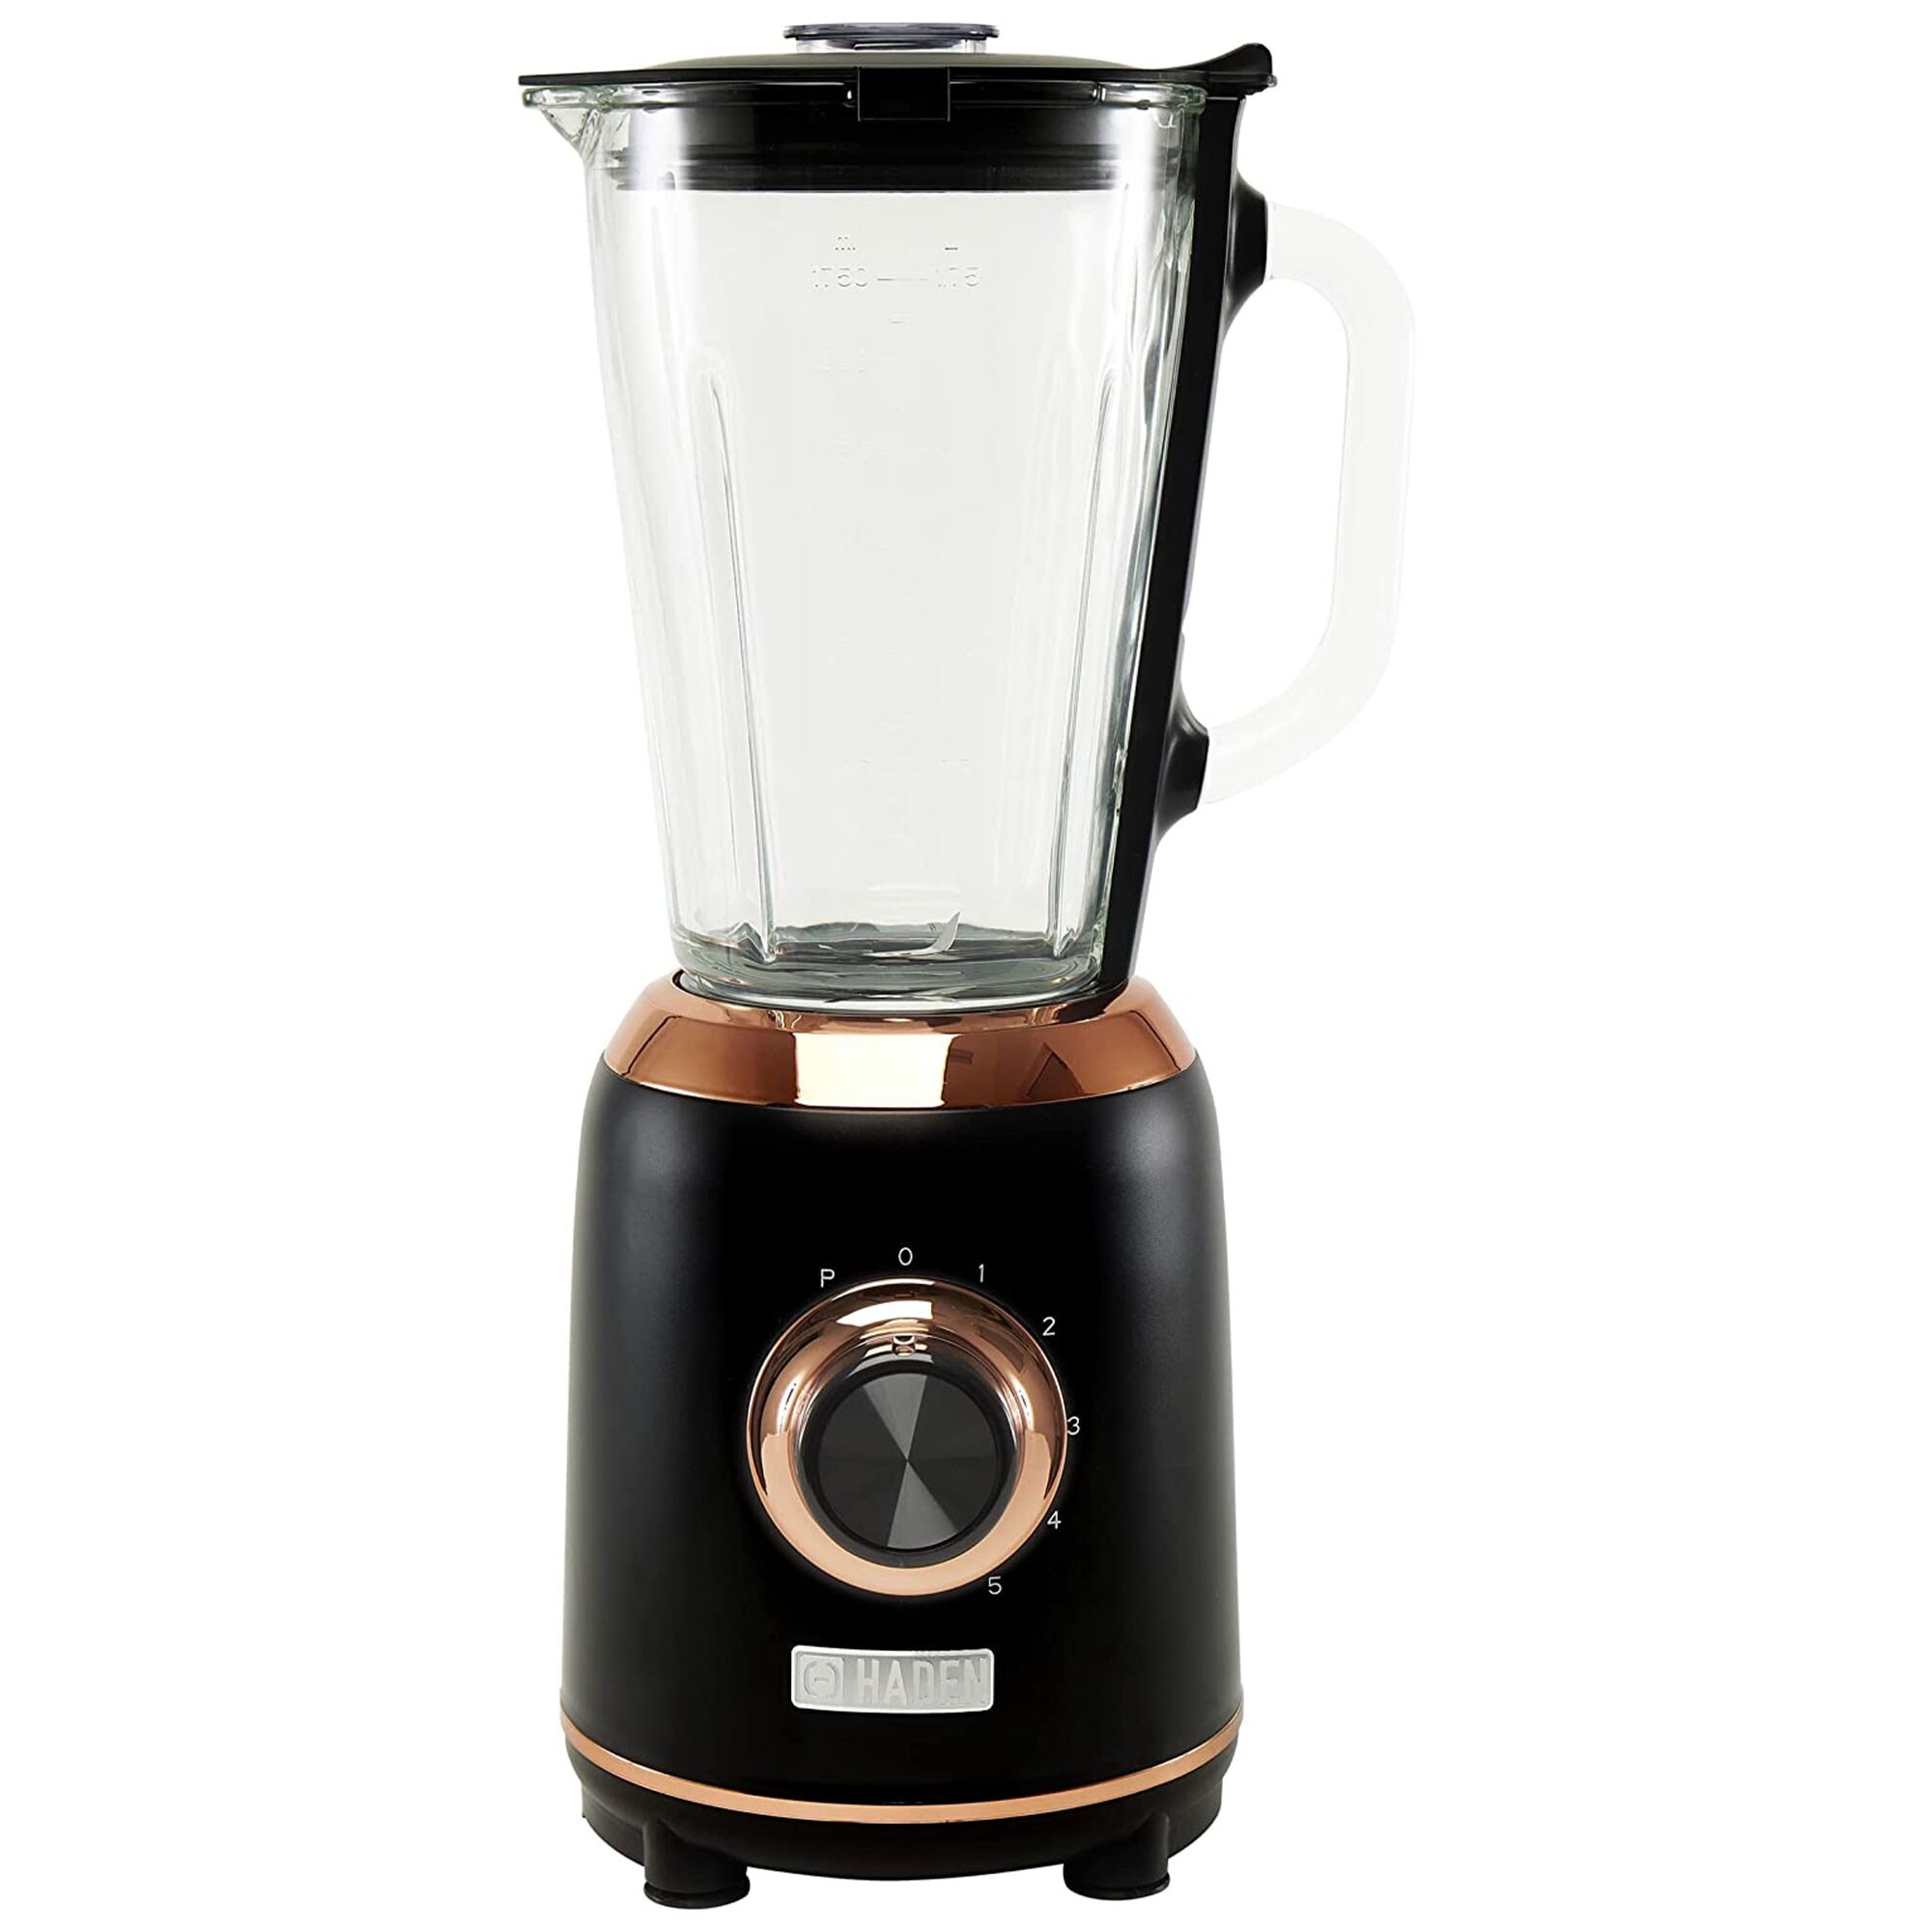 https://ak1.ostkcdn.com/images/products/is/images/direct/af3d6cbda71cf4a83dc5c66b6409deae1f9c4363/Haden-Heritage-Retro-Style-56-Ounce-5-Speed-Blender-with-Glass-Jar%2C-Black-Copper.jpg